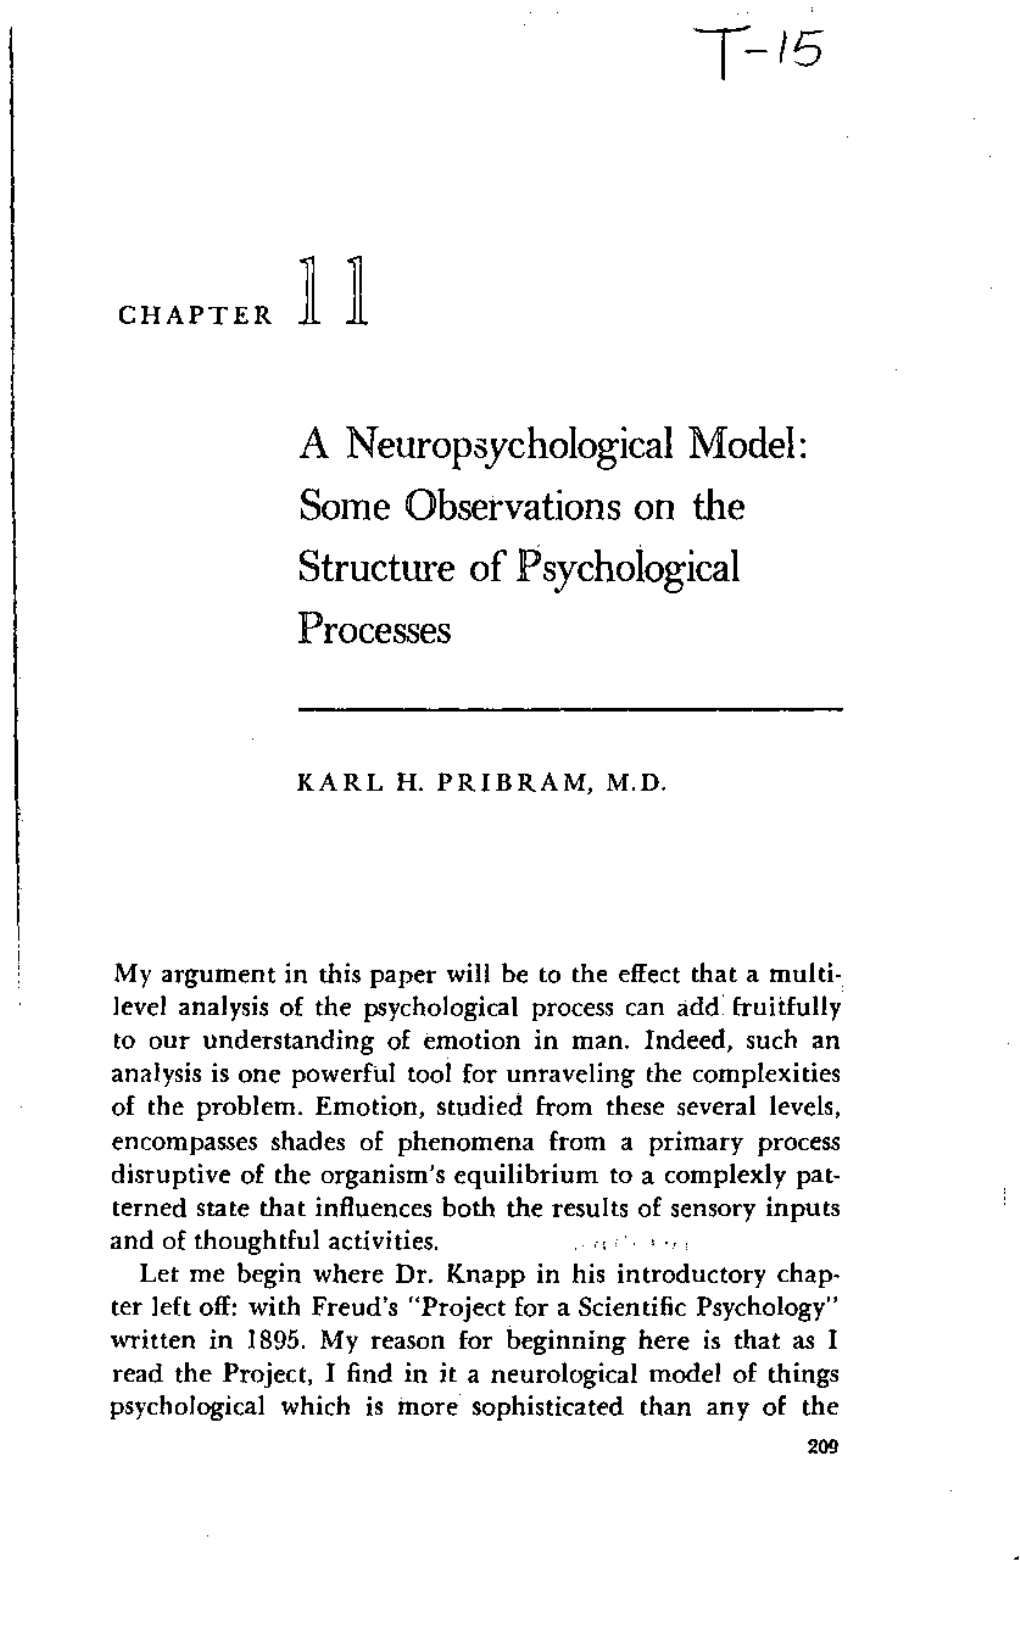 A Neuropsychological Model: Some Observations on the Structure of Psychological Processes